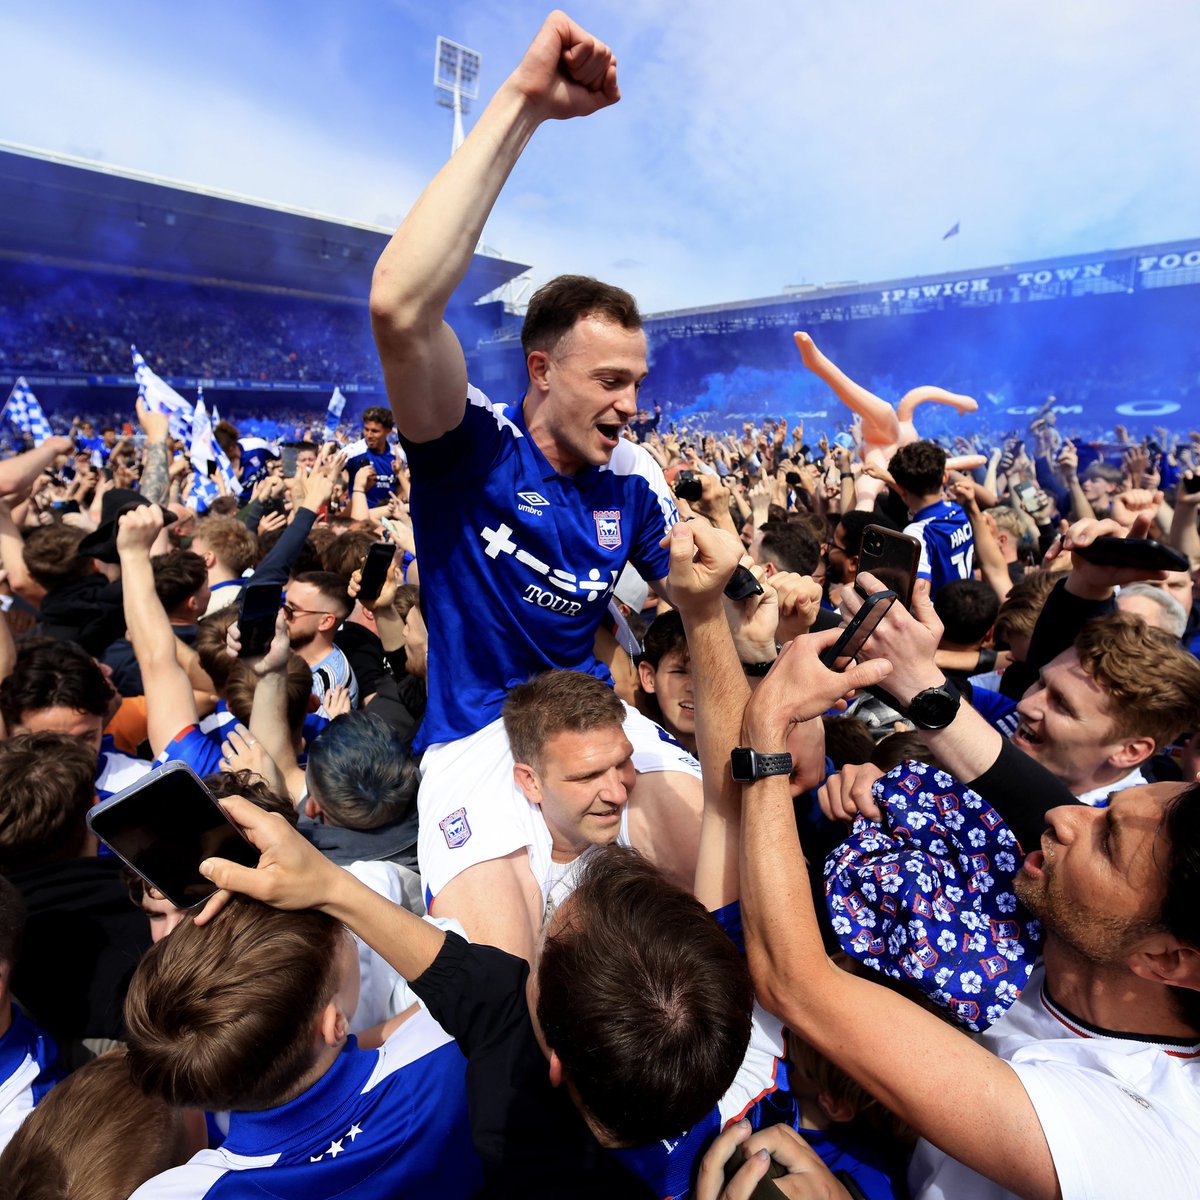 And of course, Ipswich Town. They became the first team in 12 years to win back-to-back promotions to the Premier League. They recorded the best points tally ever for a 2nd placed side in Championship history. Arguably the greatest achievement ever at this level.